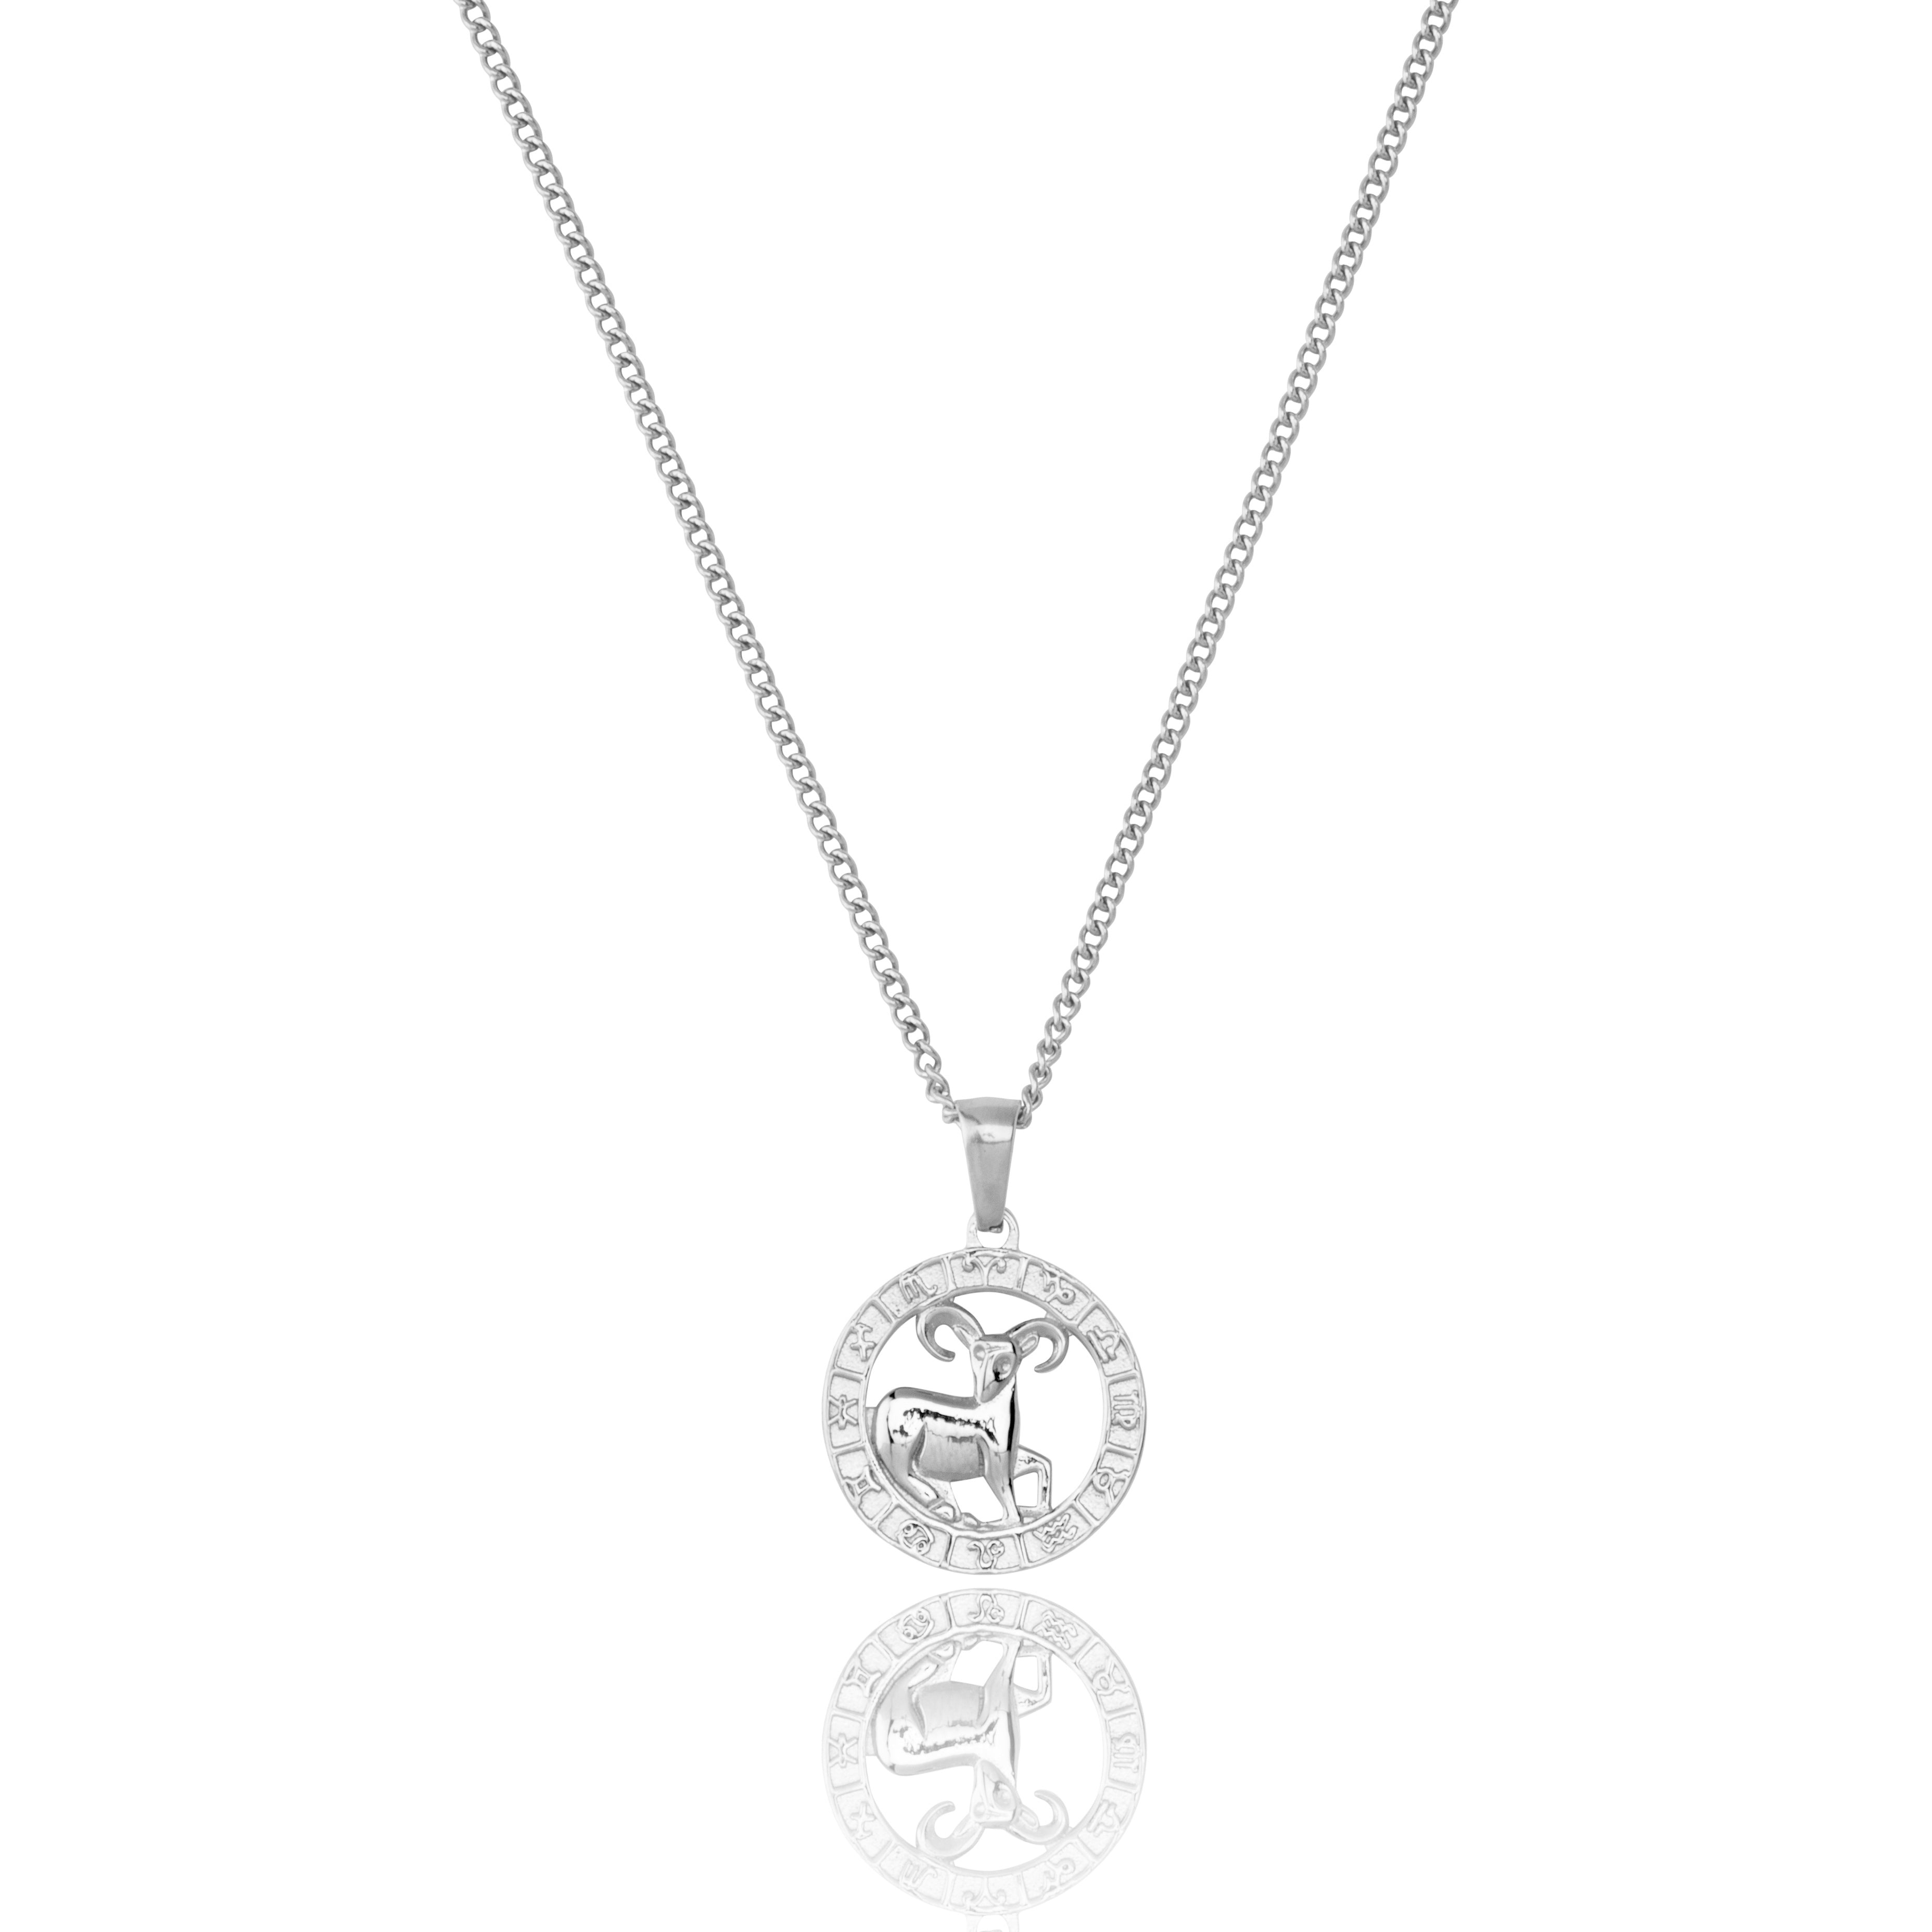 Stainless Steel Aries Zodiac Pendant and Chain.